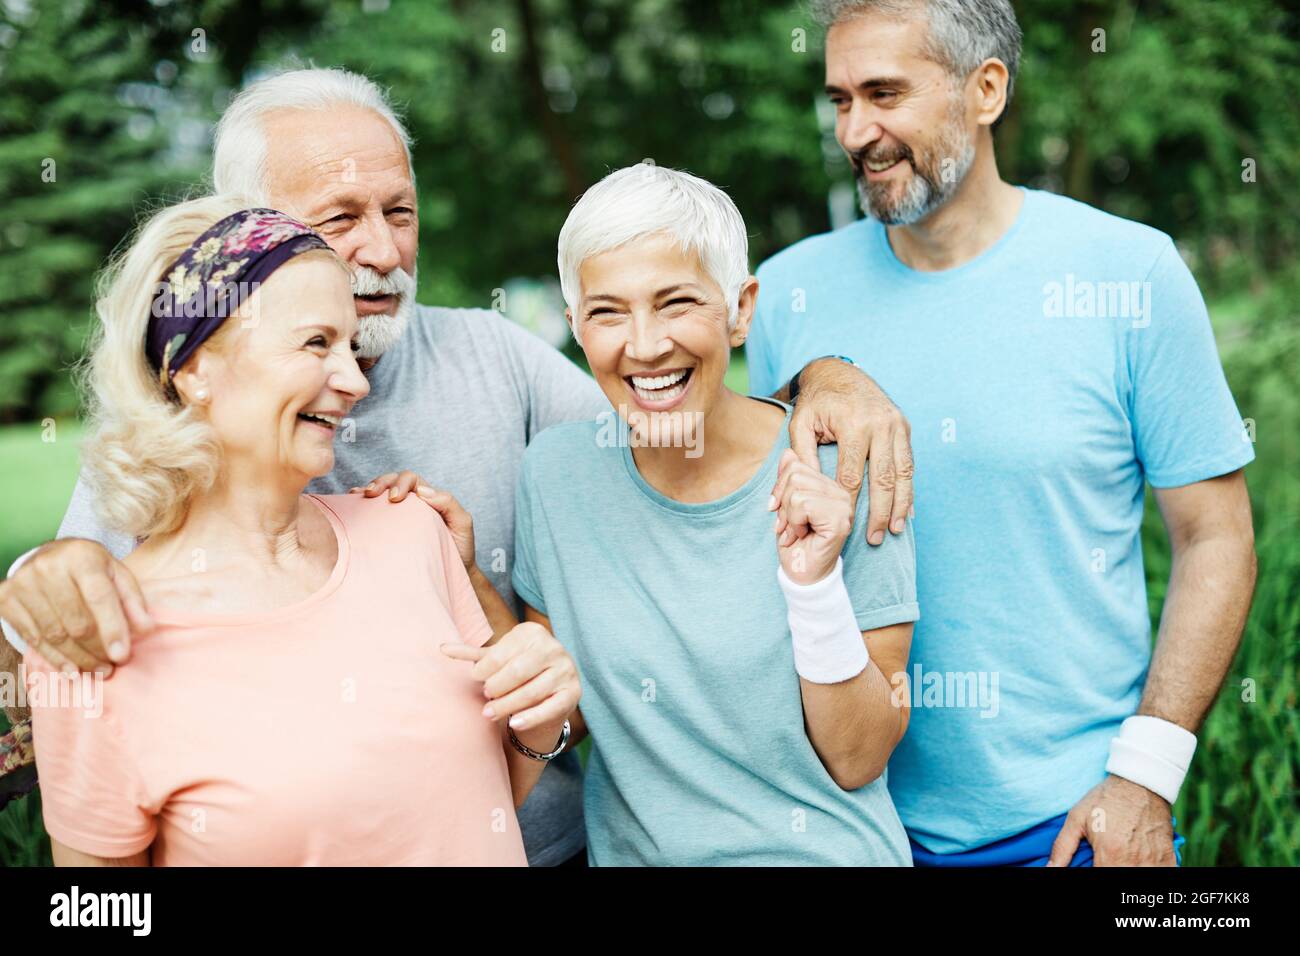 outdoor senior fitness woman man lifestyle active sport exercise healthy fit retirement Stock Photo